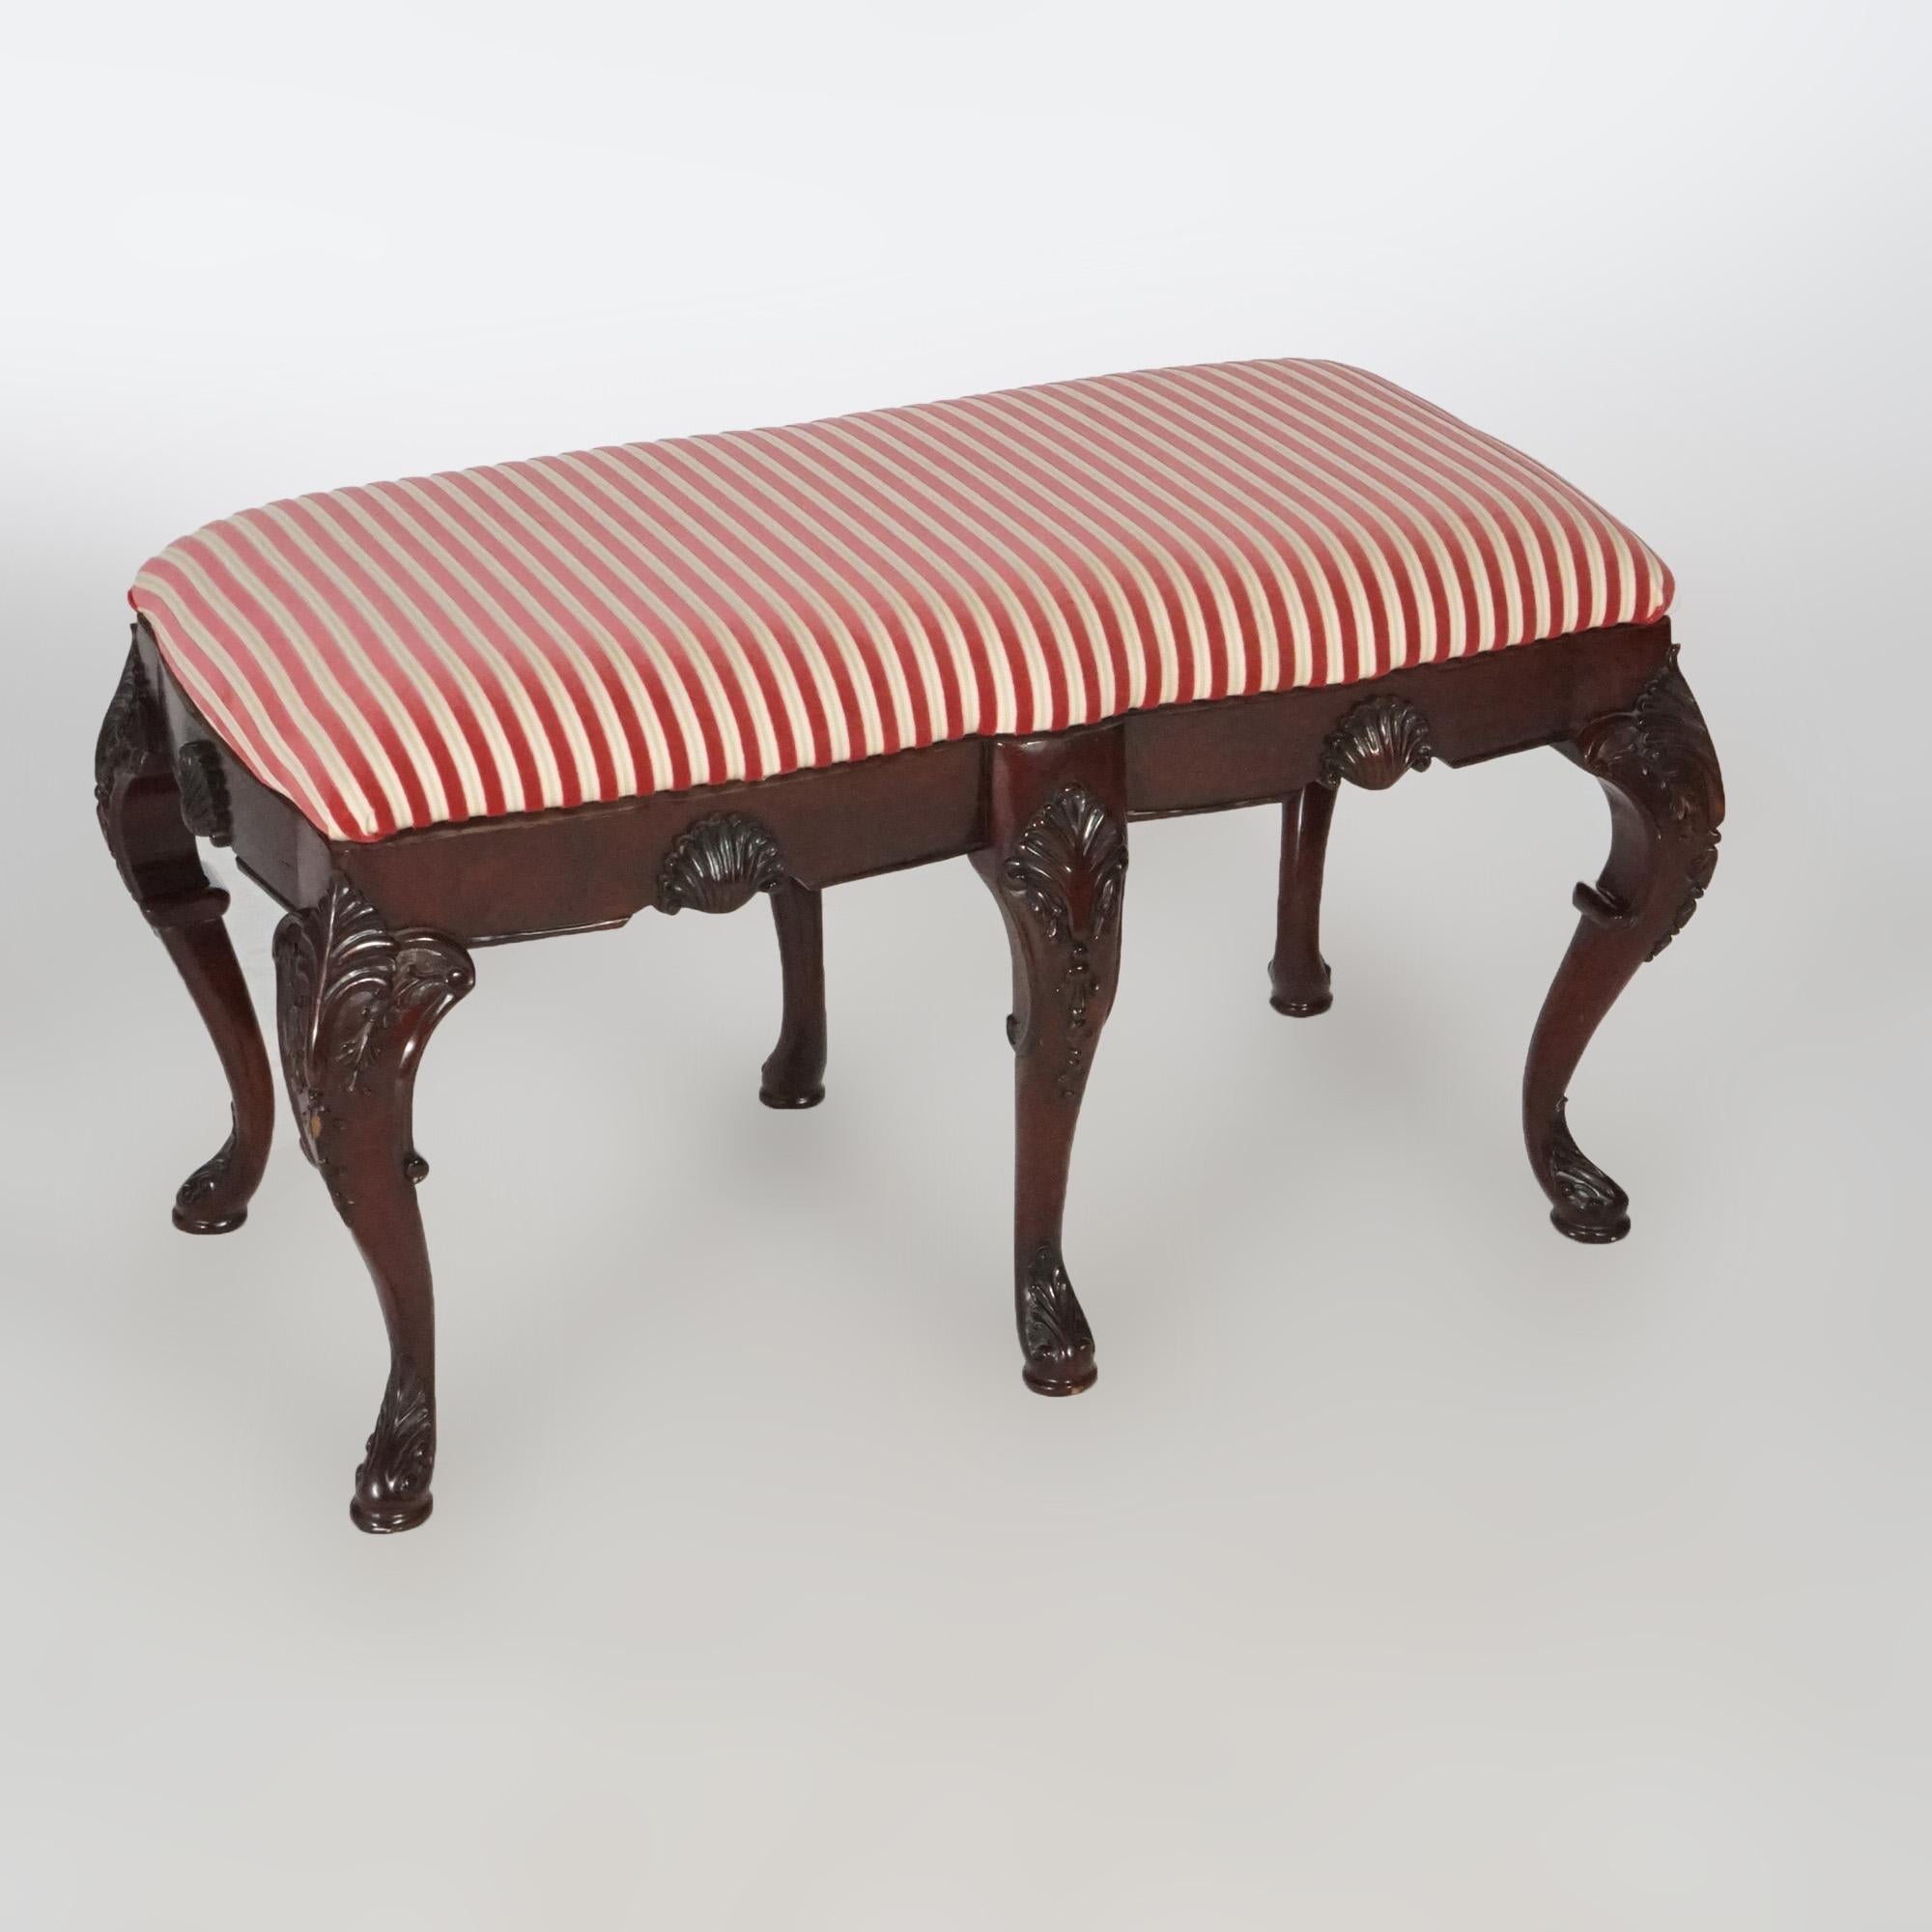 French Style Carved Mahogany Upholstered Long Bench 20th Century For Sale 1